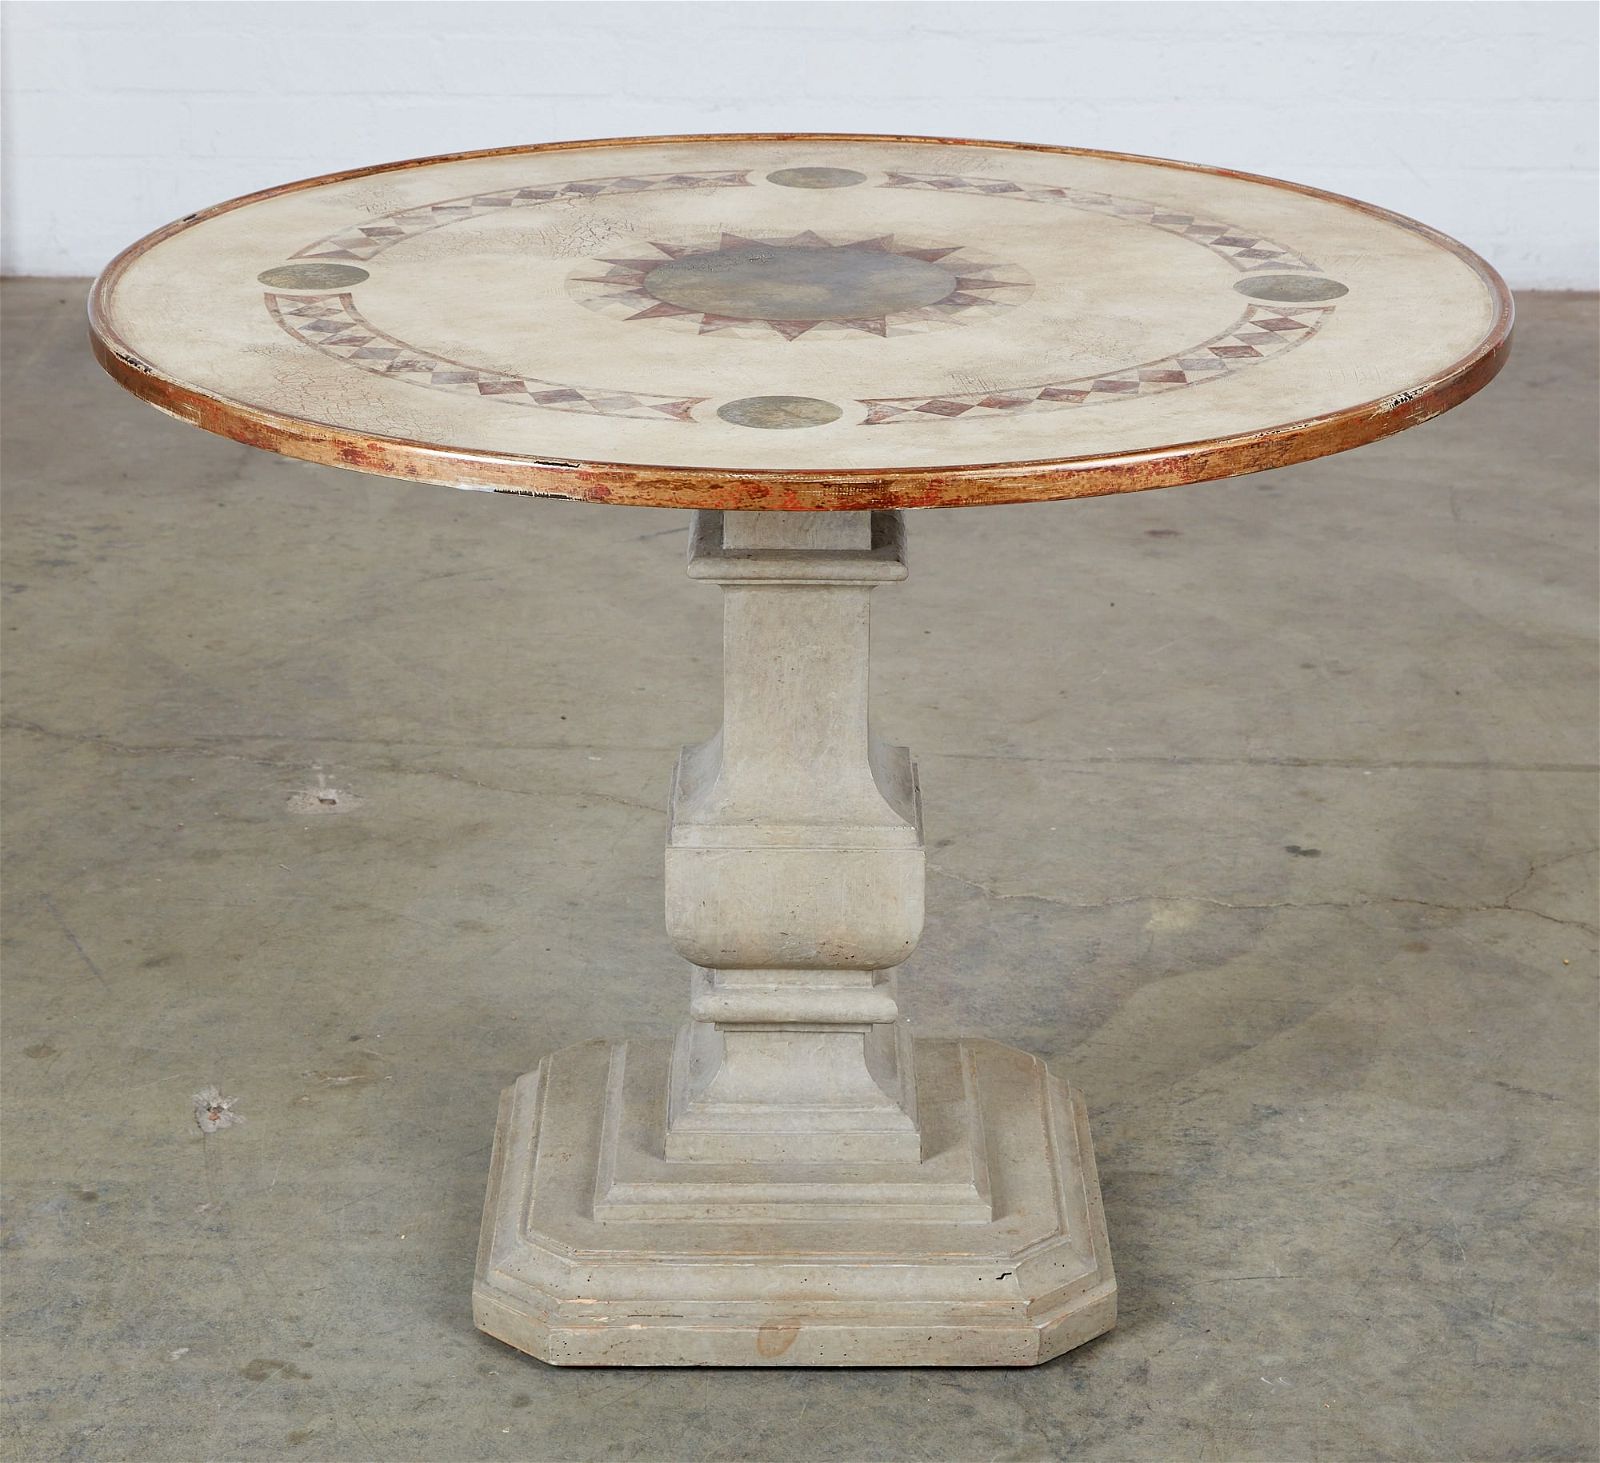 A NEOCLASSICAL STYLE CENTER TABLEA